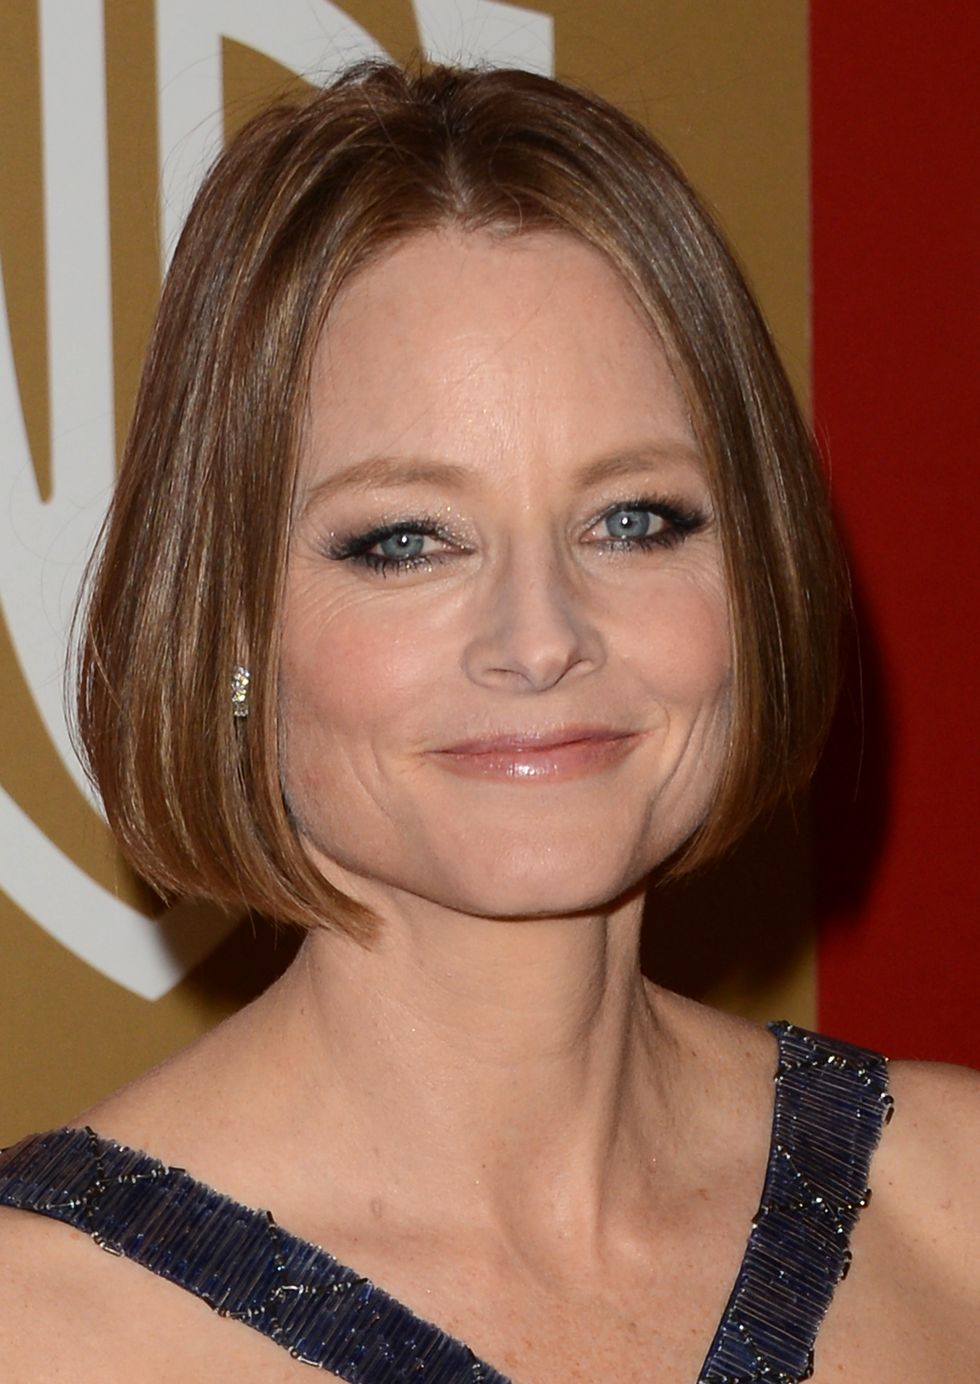 Coming out, Jodie Foster fa il bis, George Clooney "fa finta"